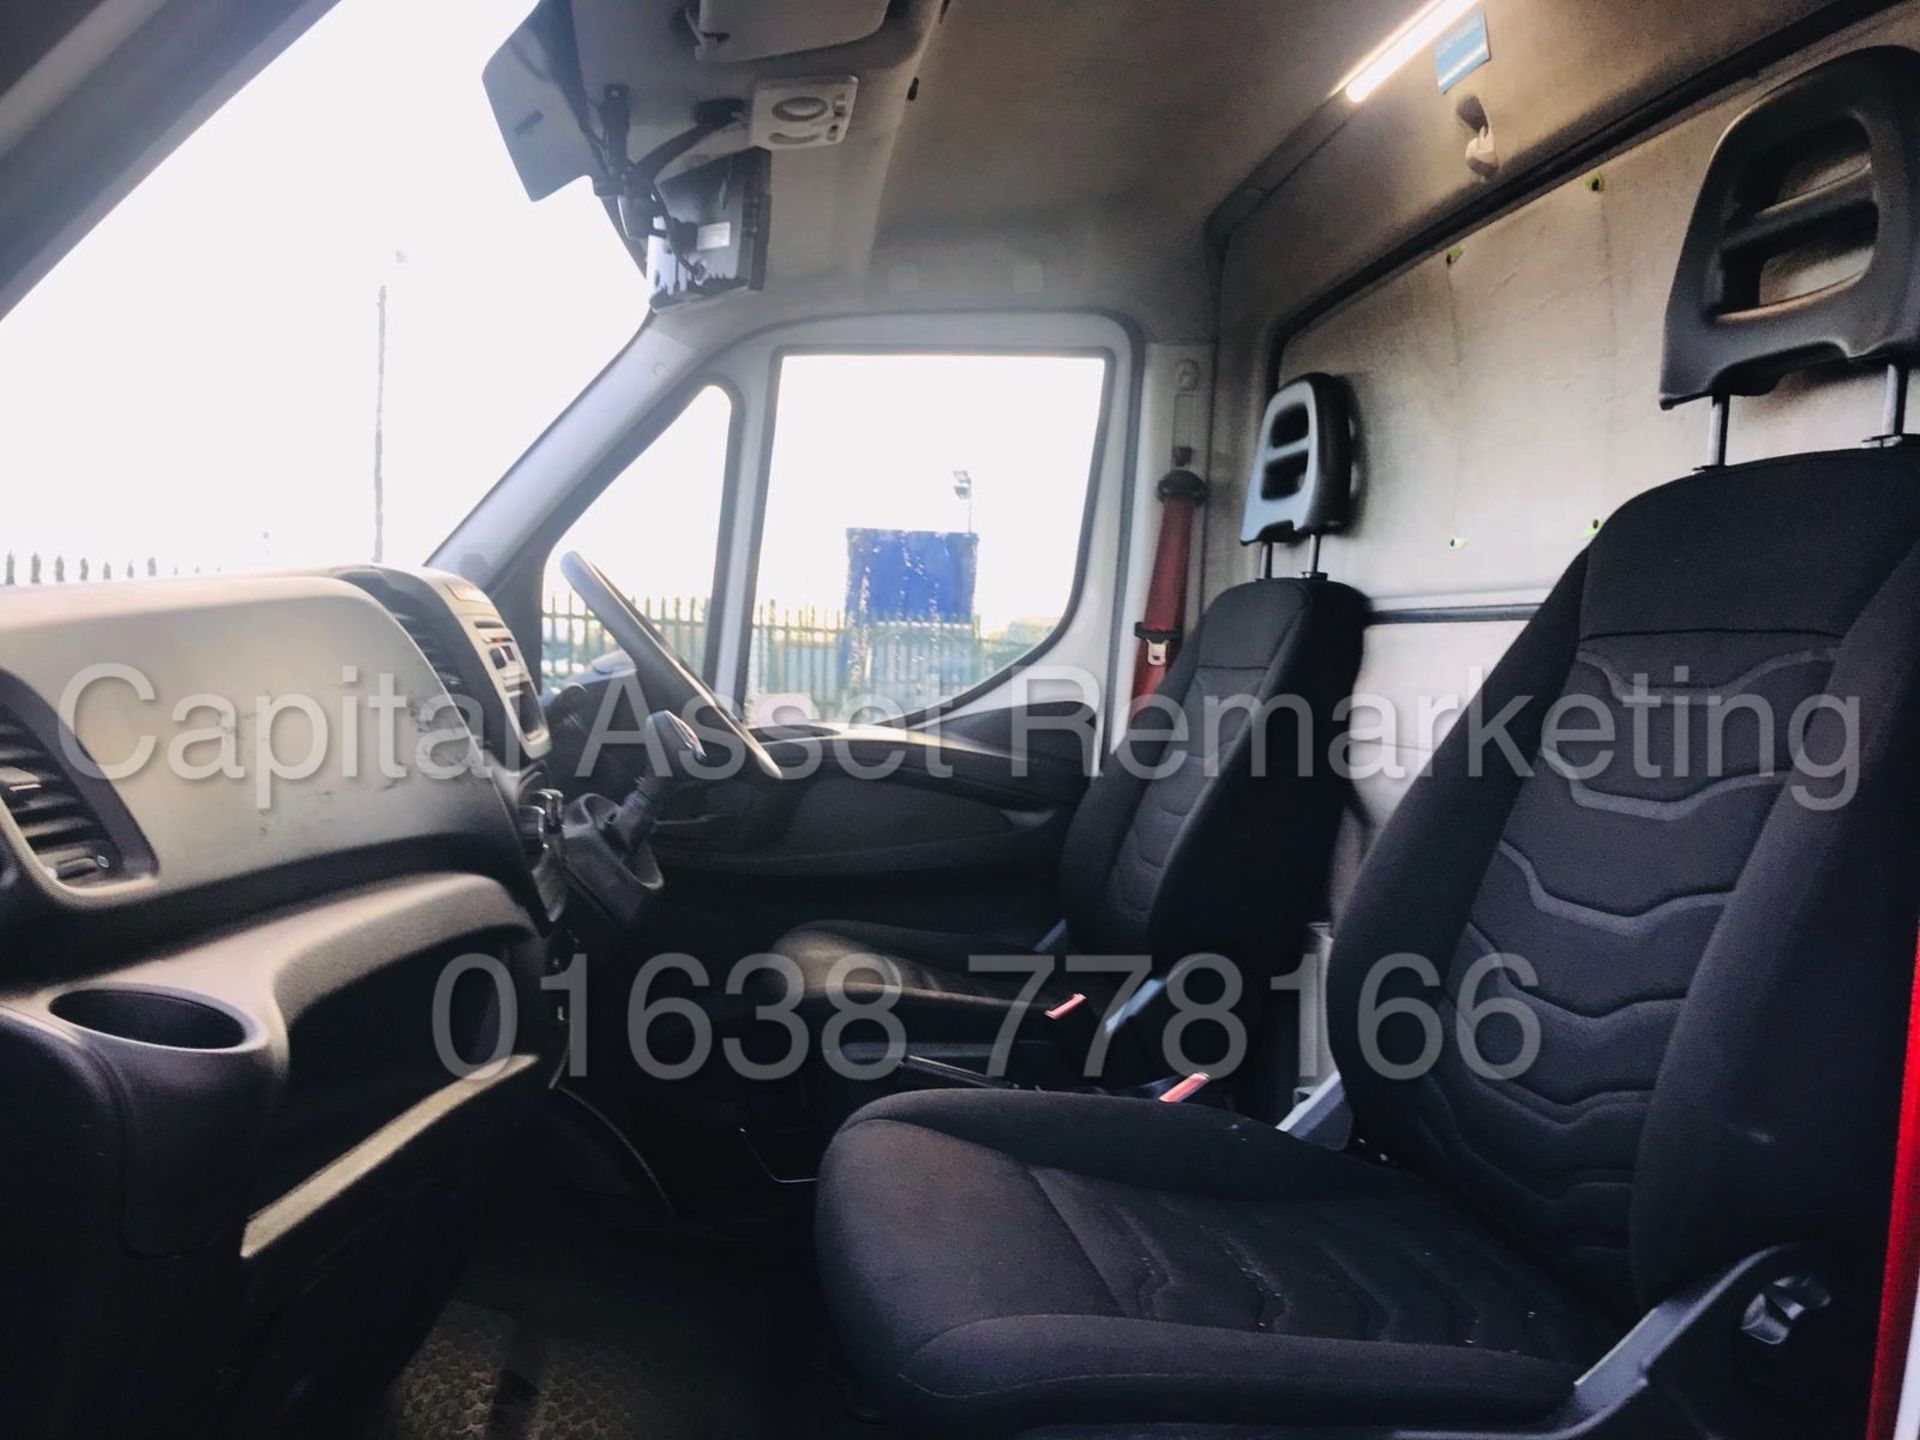 (ON SALE) IVECO DAILY 35S11 *LWB - REFRIGERATED BOX* (2015 - NEW MODEL) '2.3 DIESEL - 8 SPEED AUTO' - Image 29 of 37